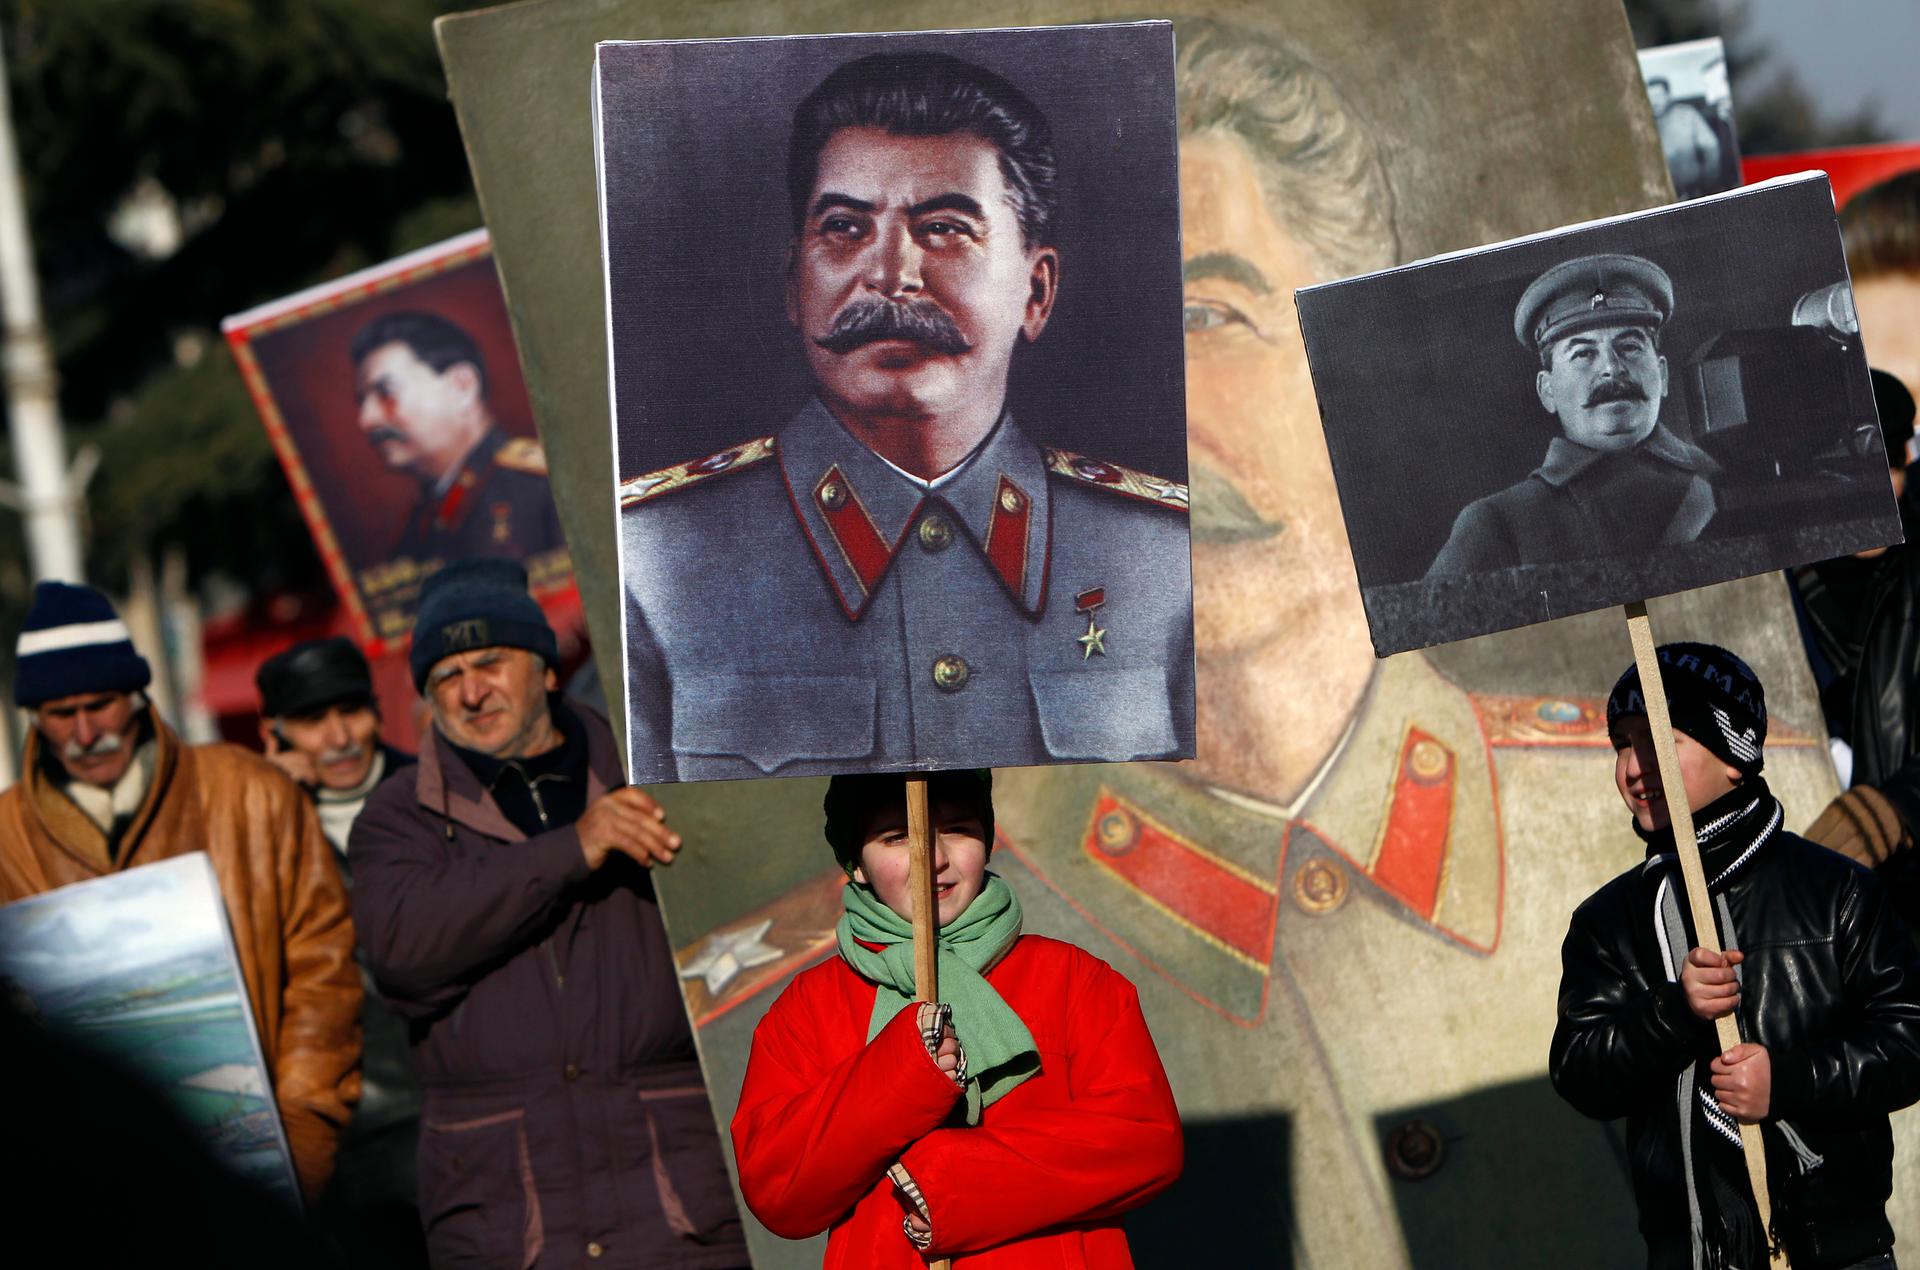 People carry portraits of late Soviet dictator Josef Stalin as they attend a gathering marking the 130th anniversary of his birthday